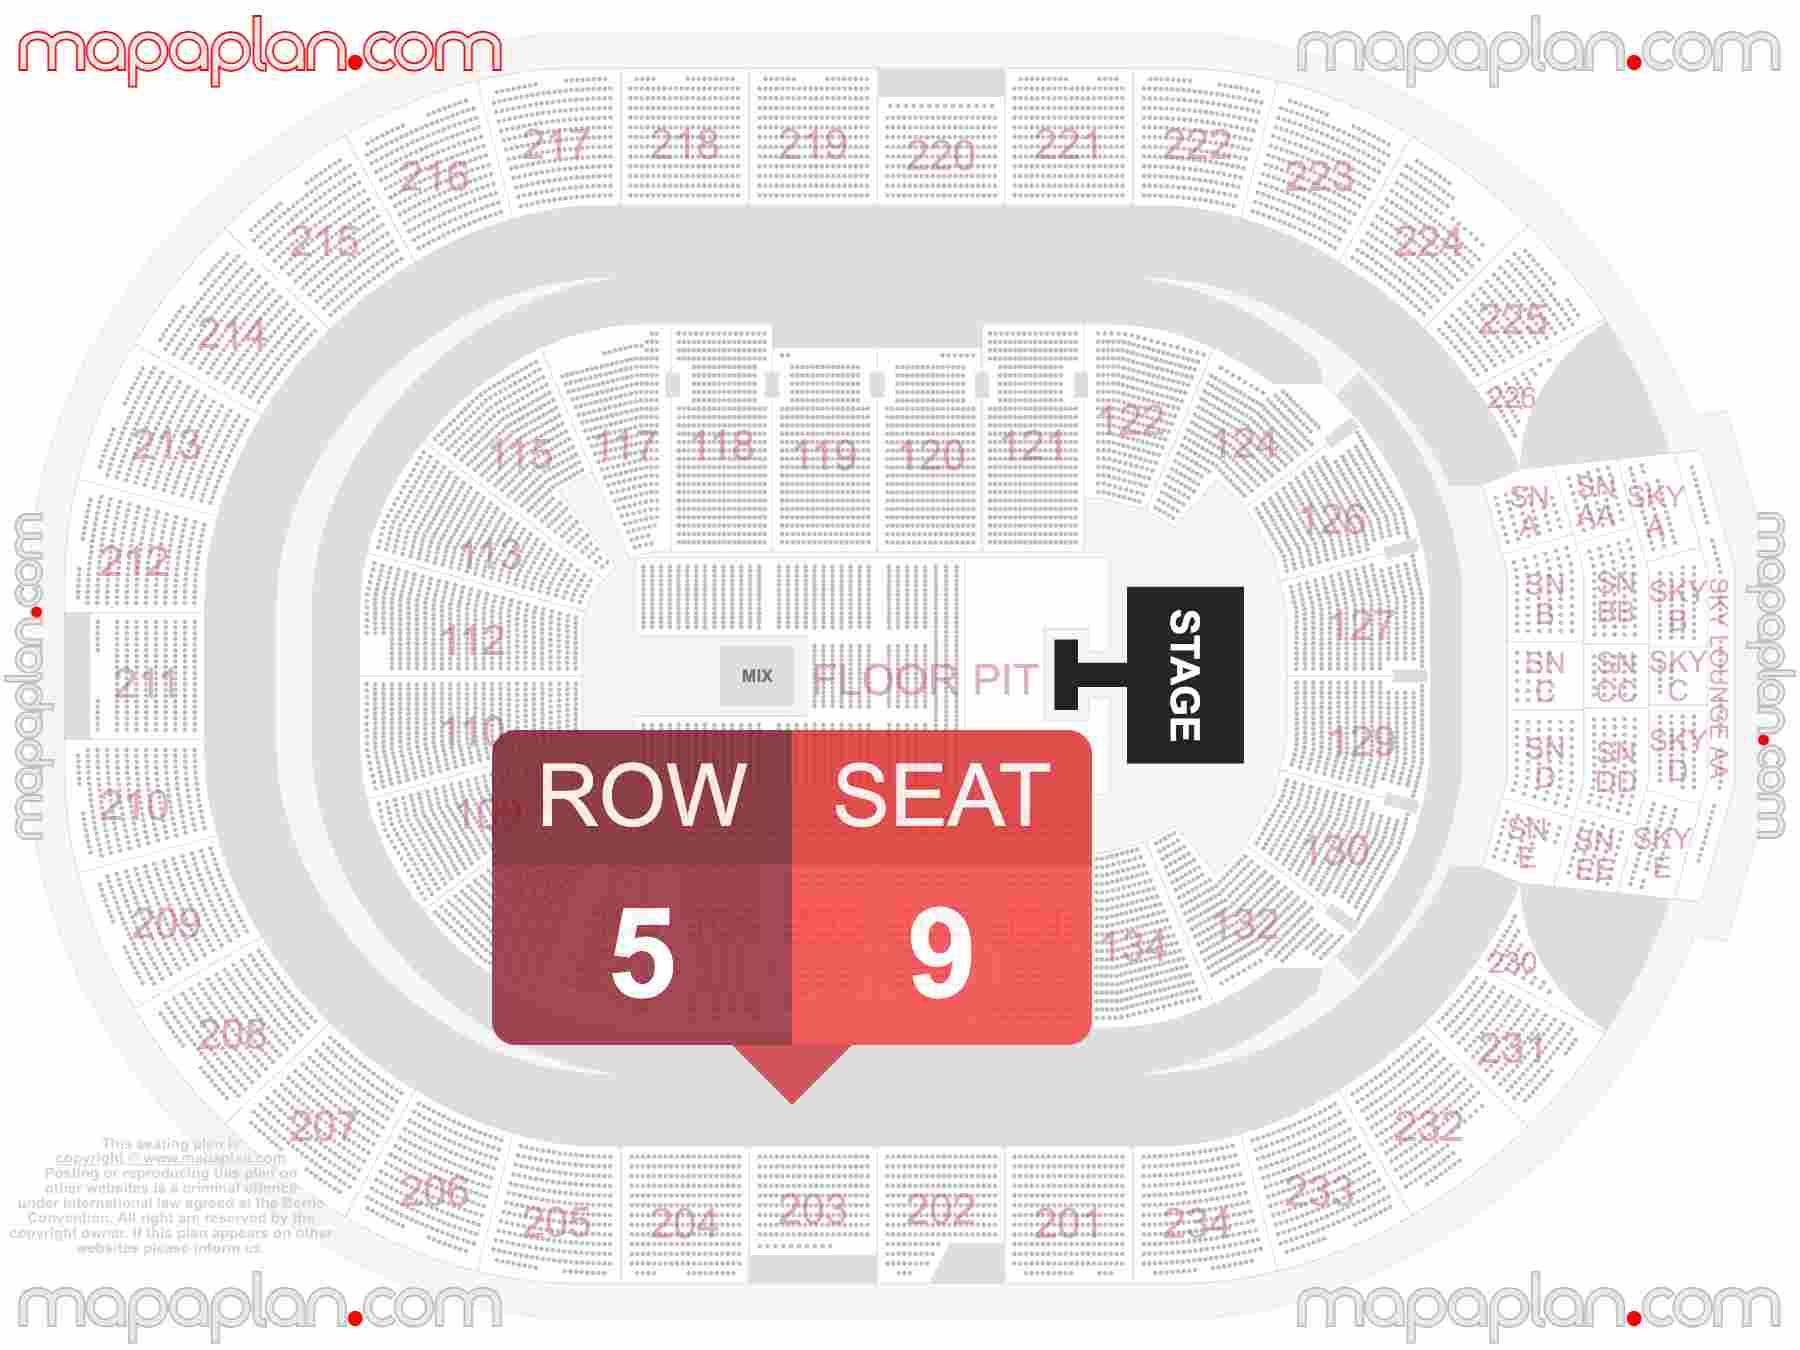 Edmonton Rogers Place seating map Concert with extended catwalk runway B-stage seating map with exact section numbers showing best rows and seats selection 3d layout - Best interactive seat finder tool with precise detailed location data